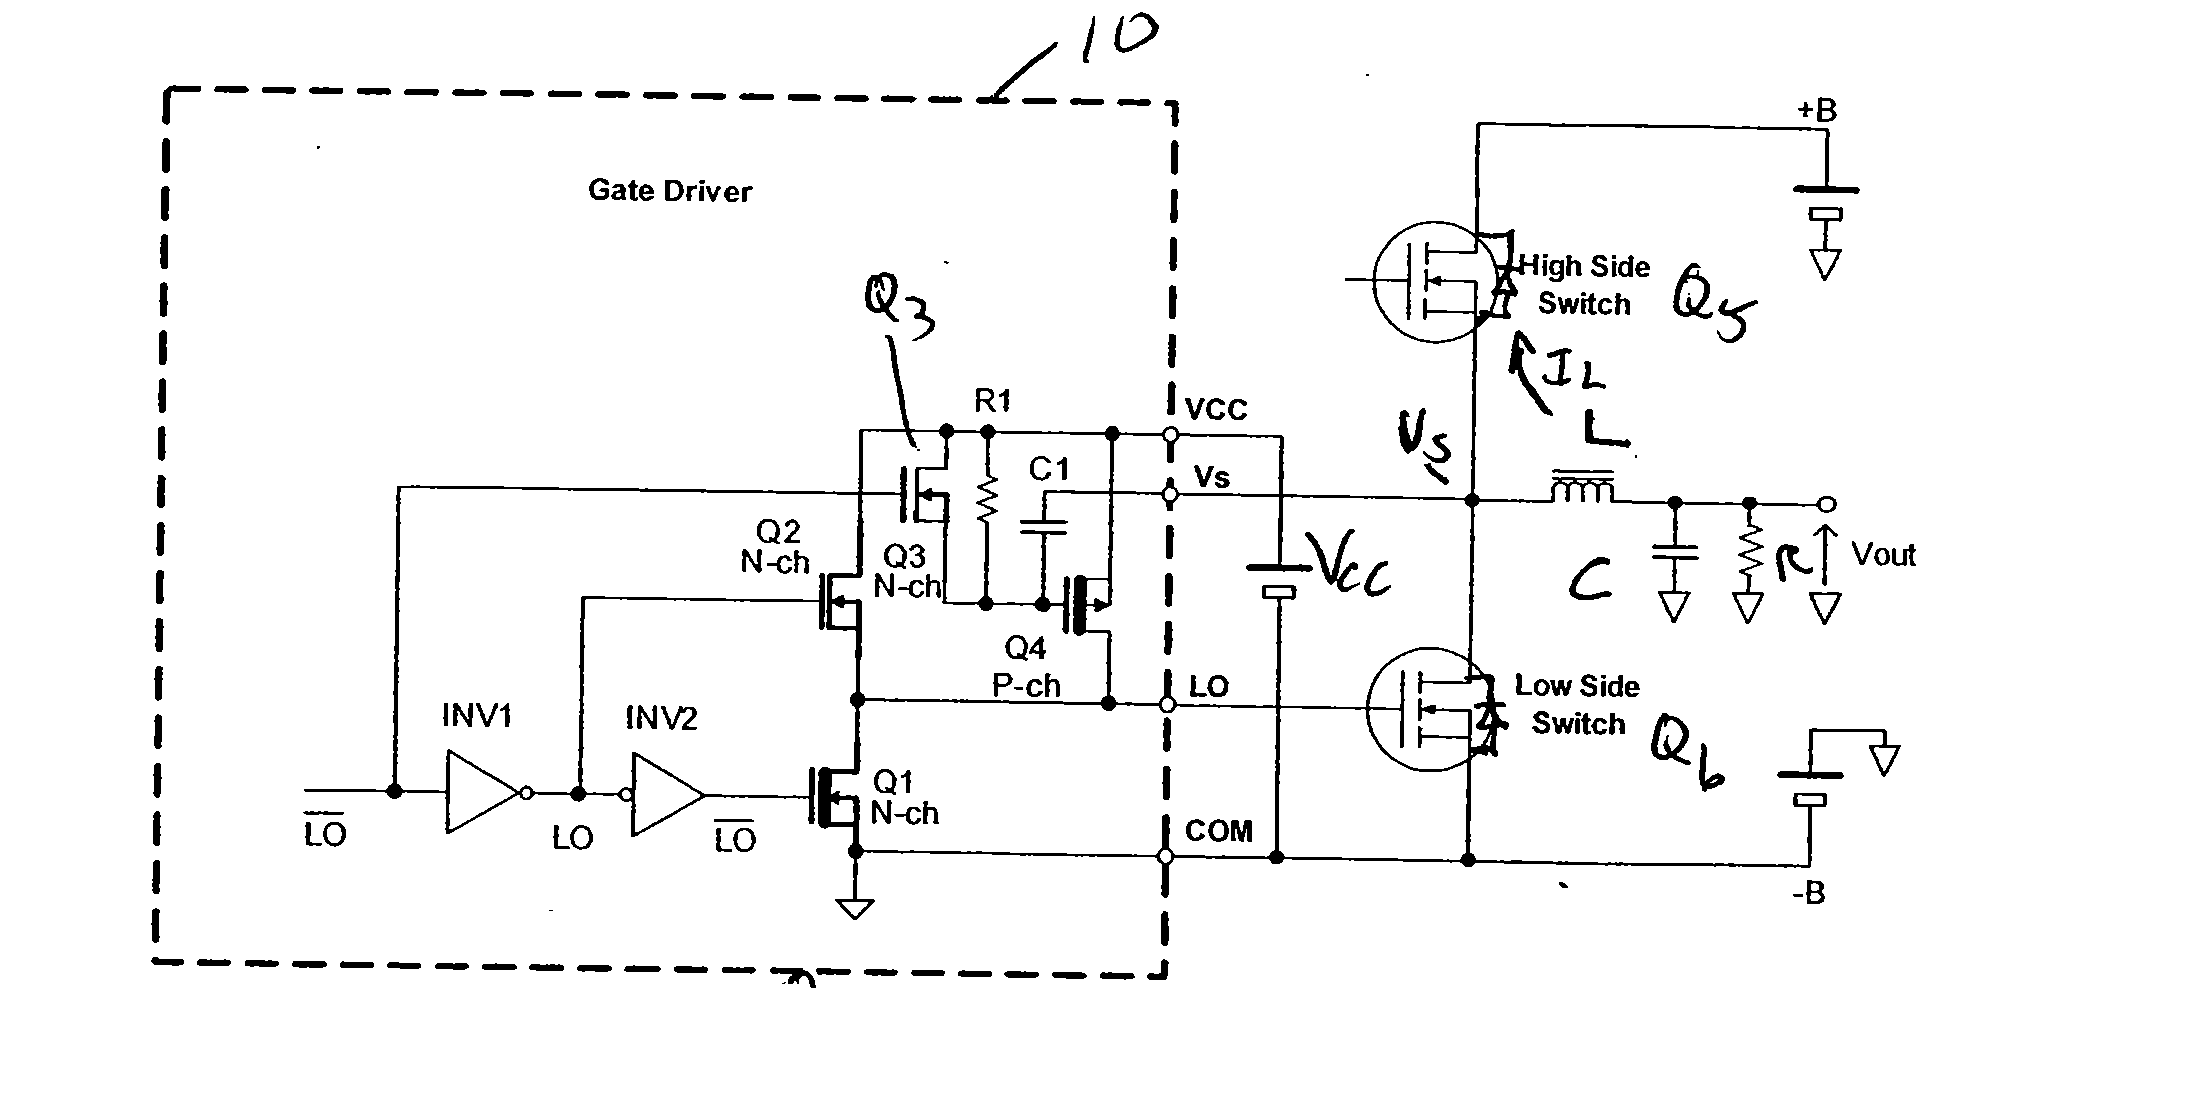 Gate drive for lower switching noise emission